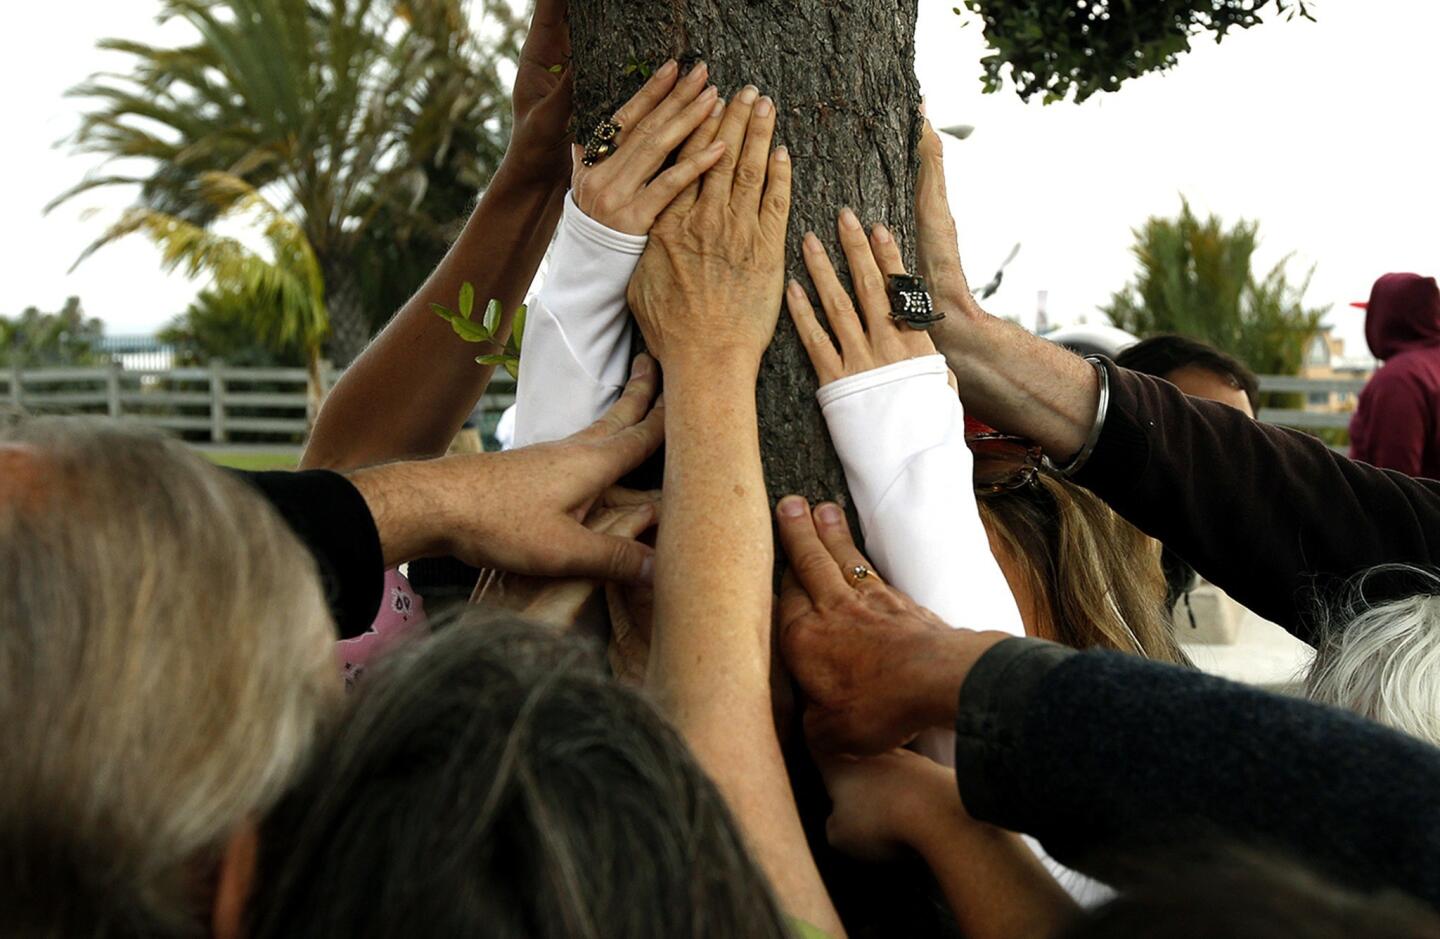 A group of people surround the Children's Tree of Life at Santa Monica Palisades Park during a ceremony in honor of Earth Day.